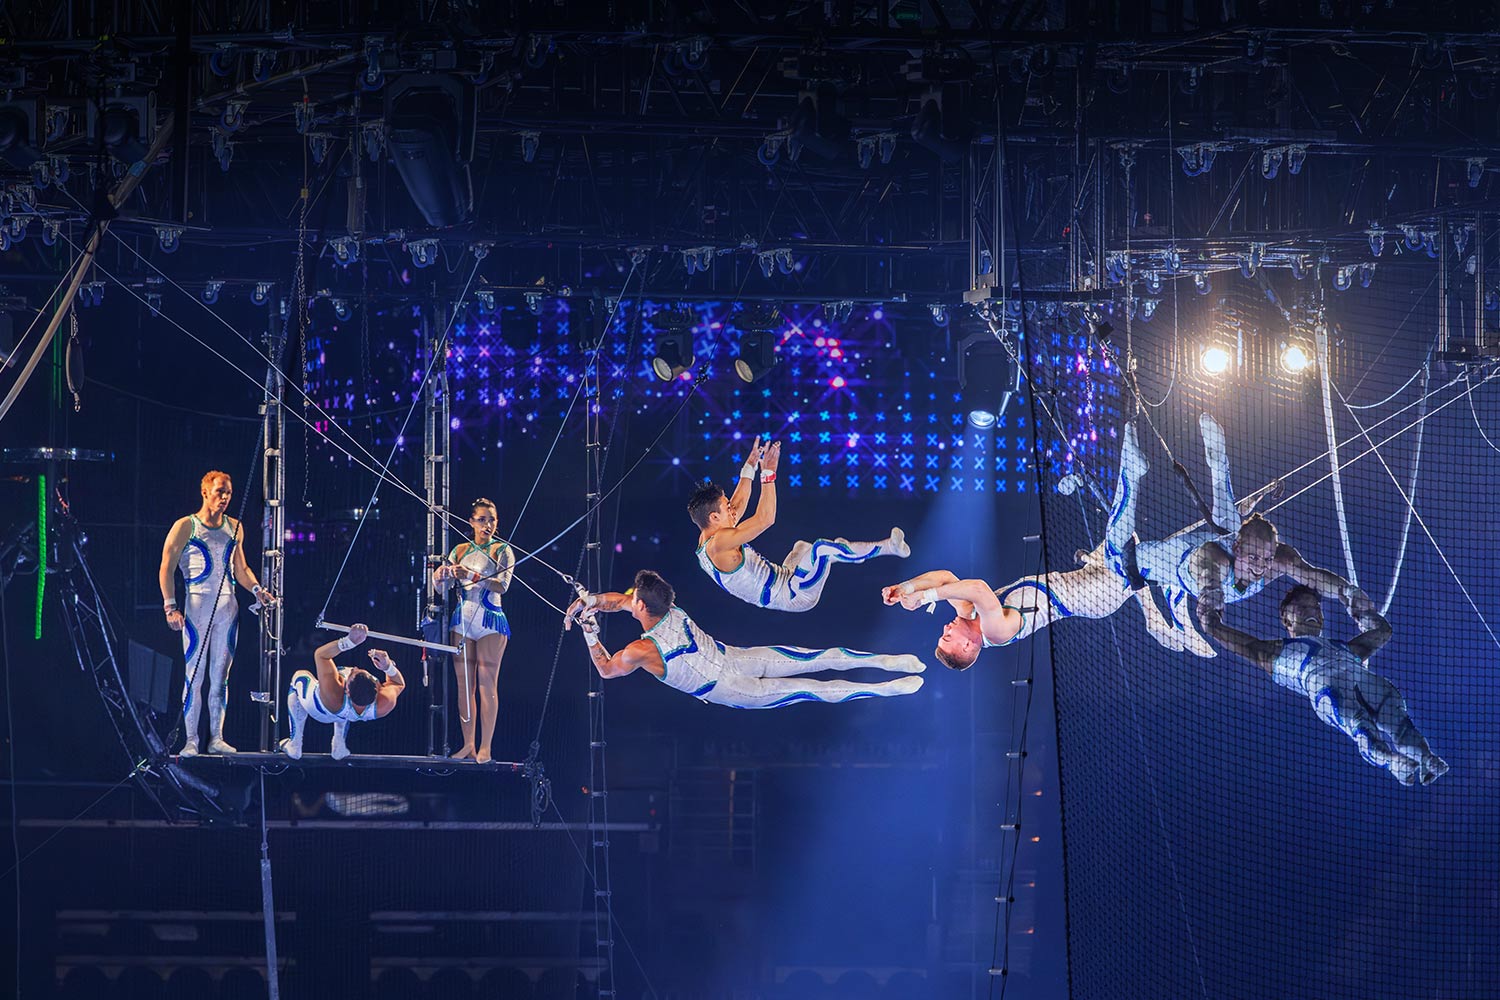 Trapeze artists soaring through the air